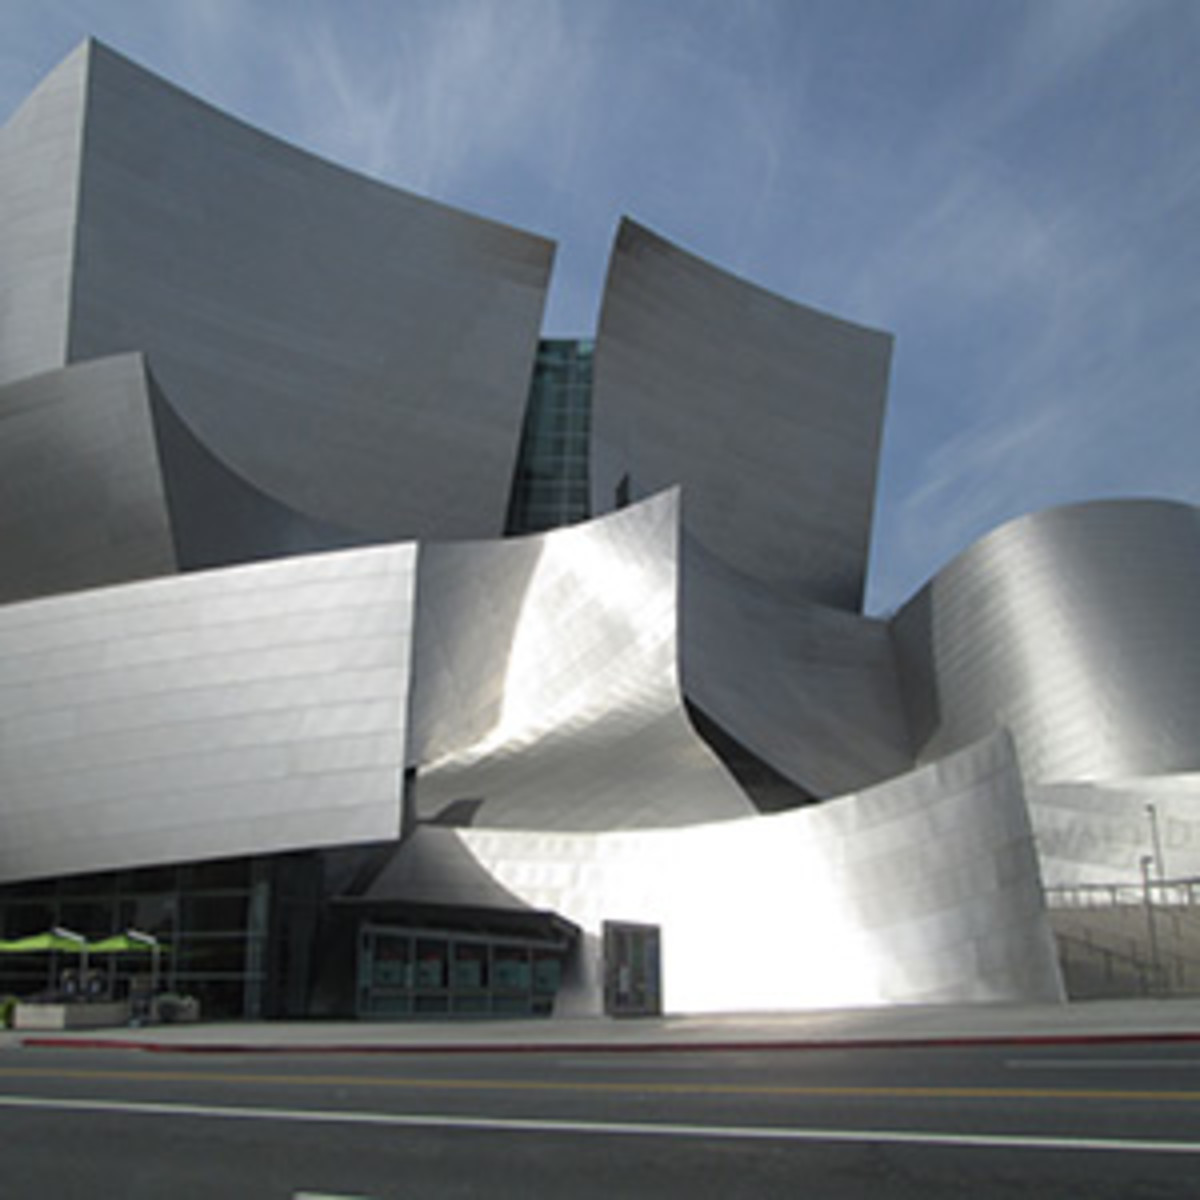 Frank Gehry: The Penultimate Visionary